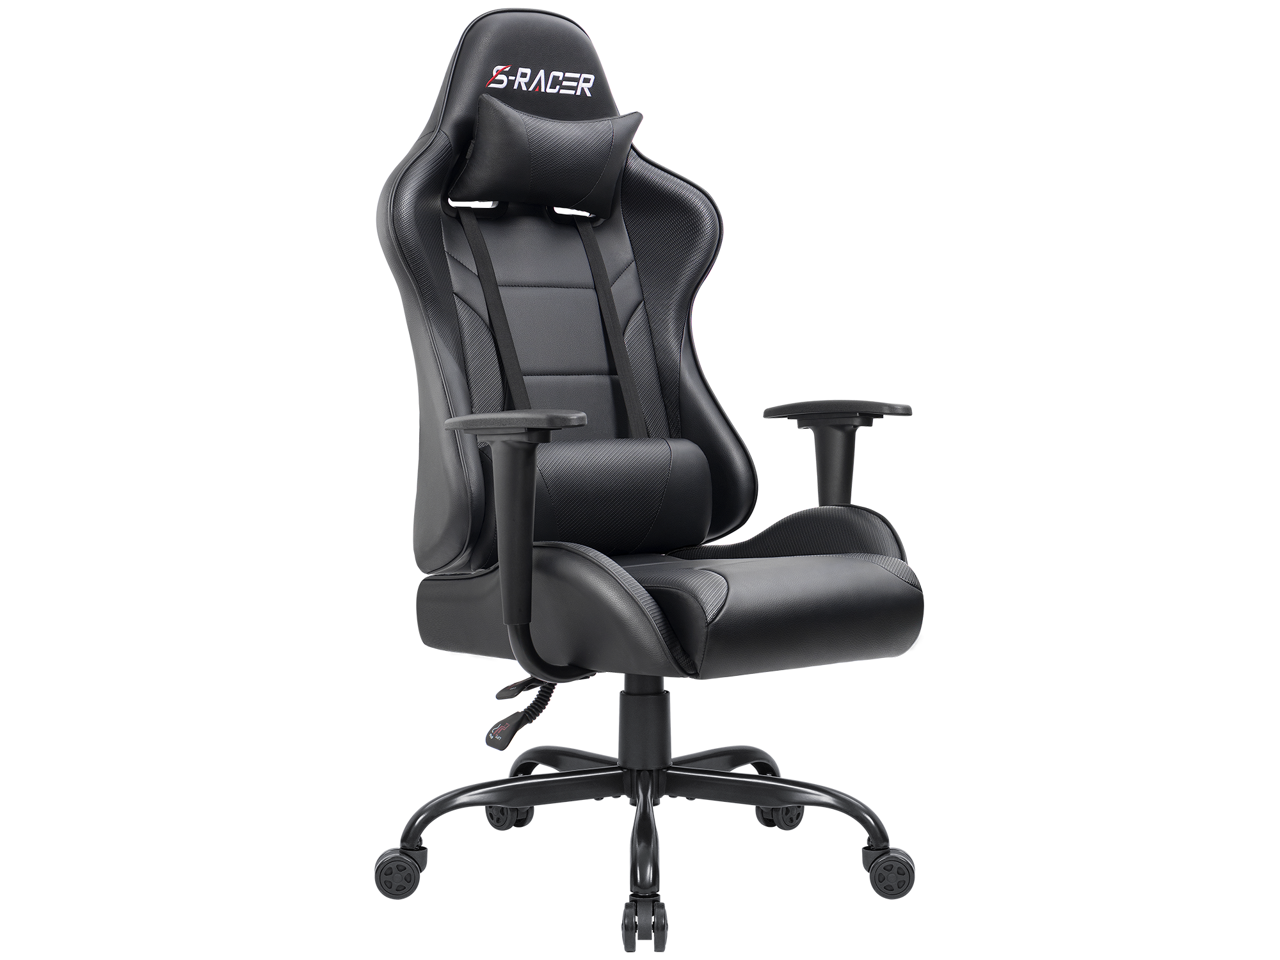 Homall Carbon Gaming Chair Leather Reclining Black Racing Style, Ergonomic Hydraulic Swivel Seat with Headrest and Lumbar Support